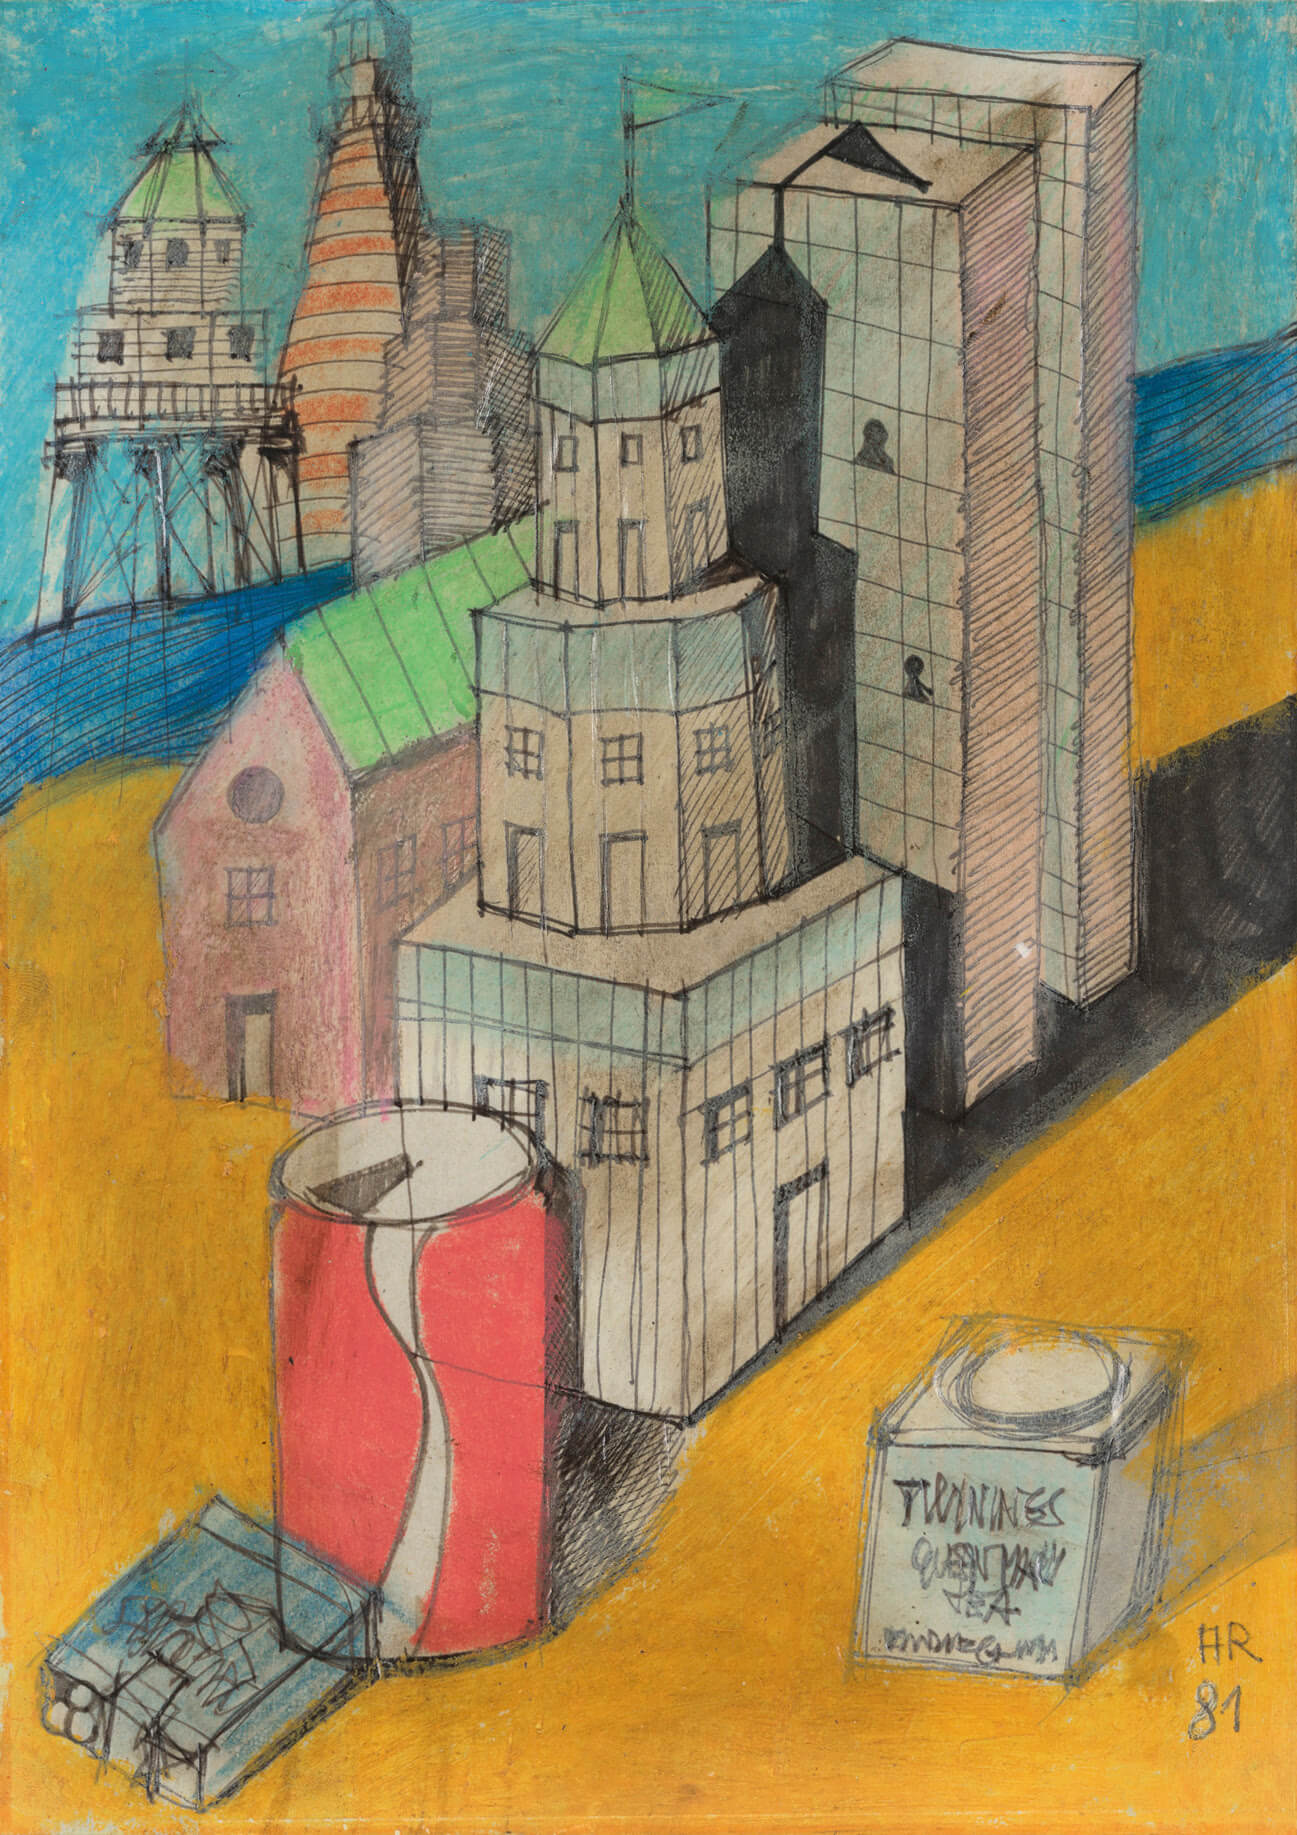 Aldo Rossi drawing of buildings and cans